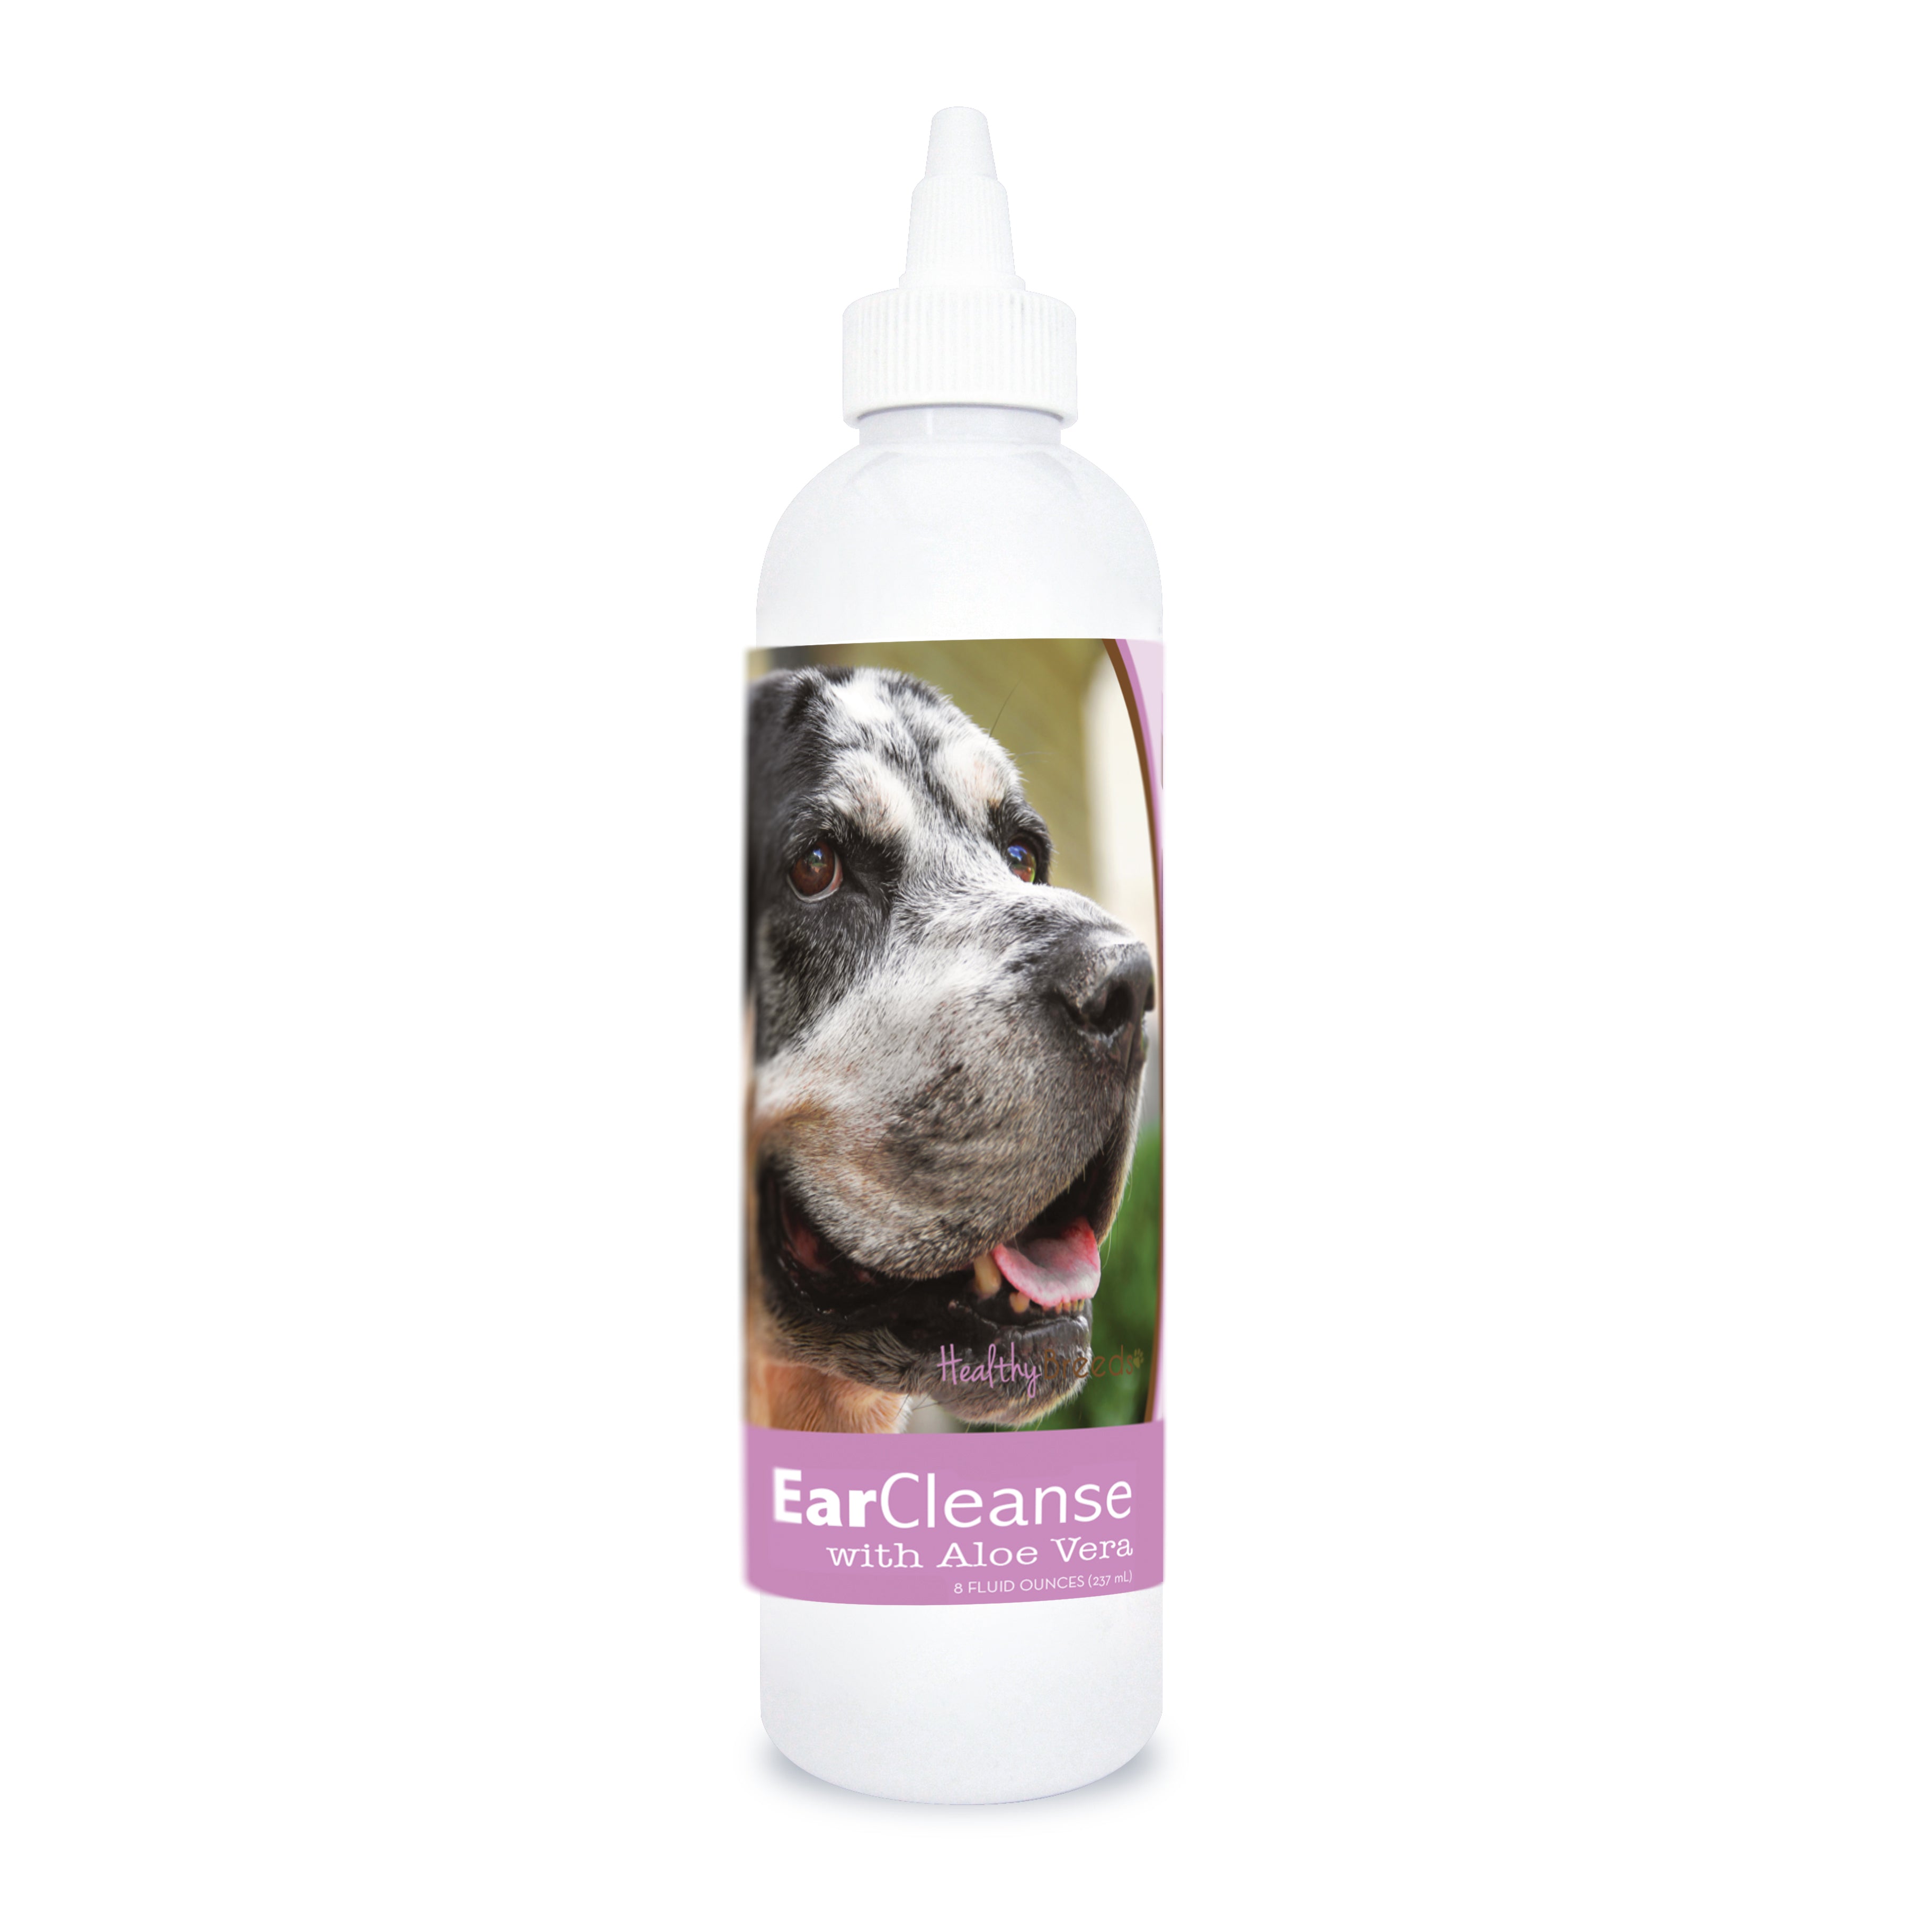 Bluetick Coonhound Ear Cleanse with Aloe Vera Sweet Pea and Vanilla 8 oz